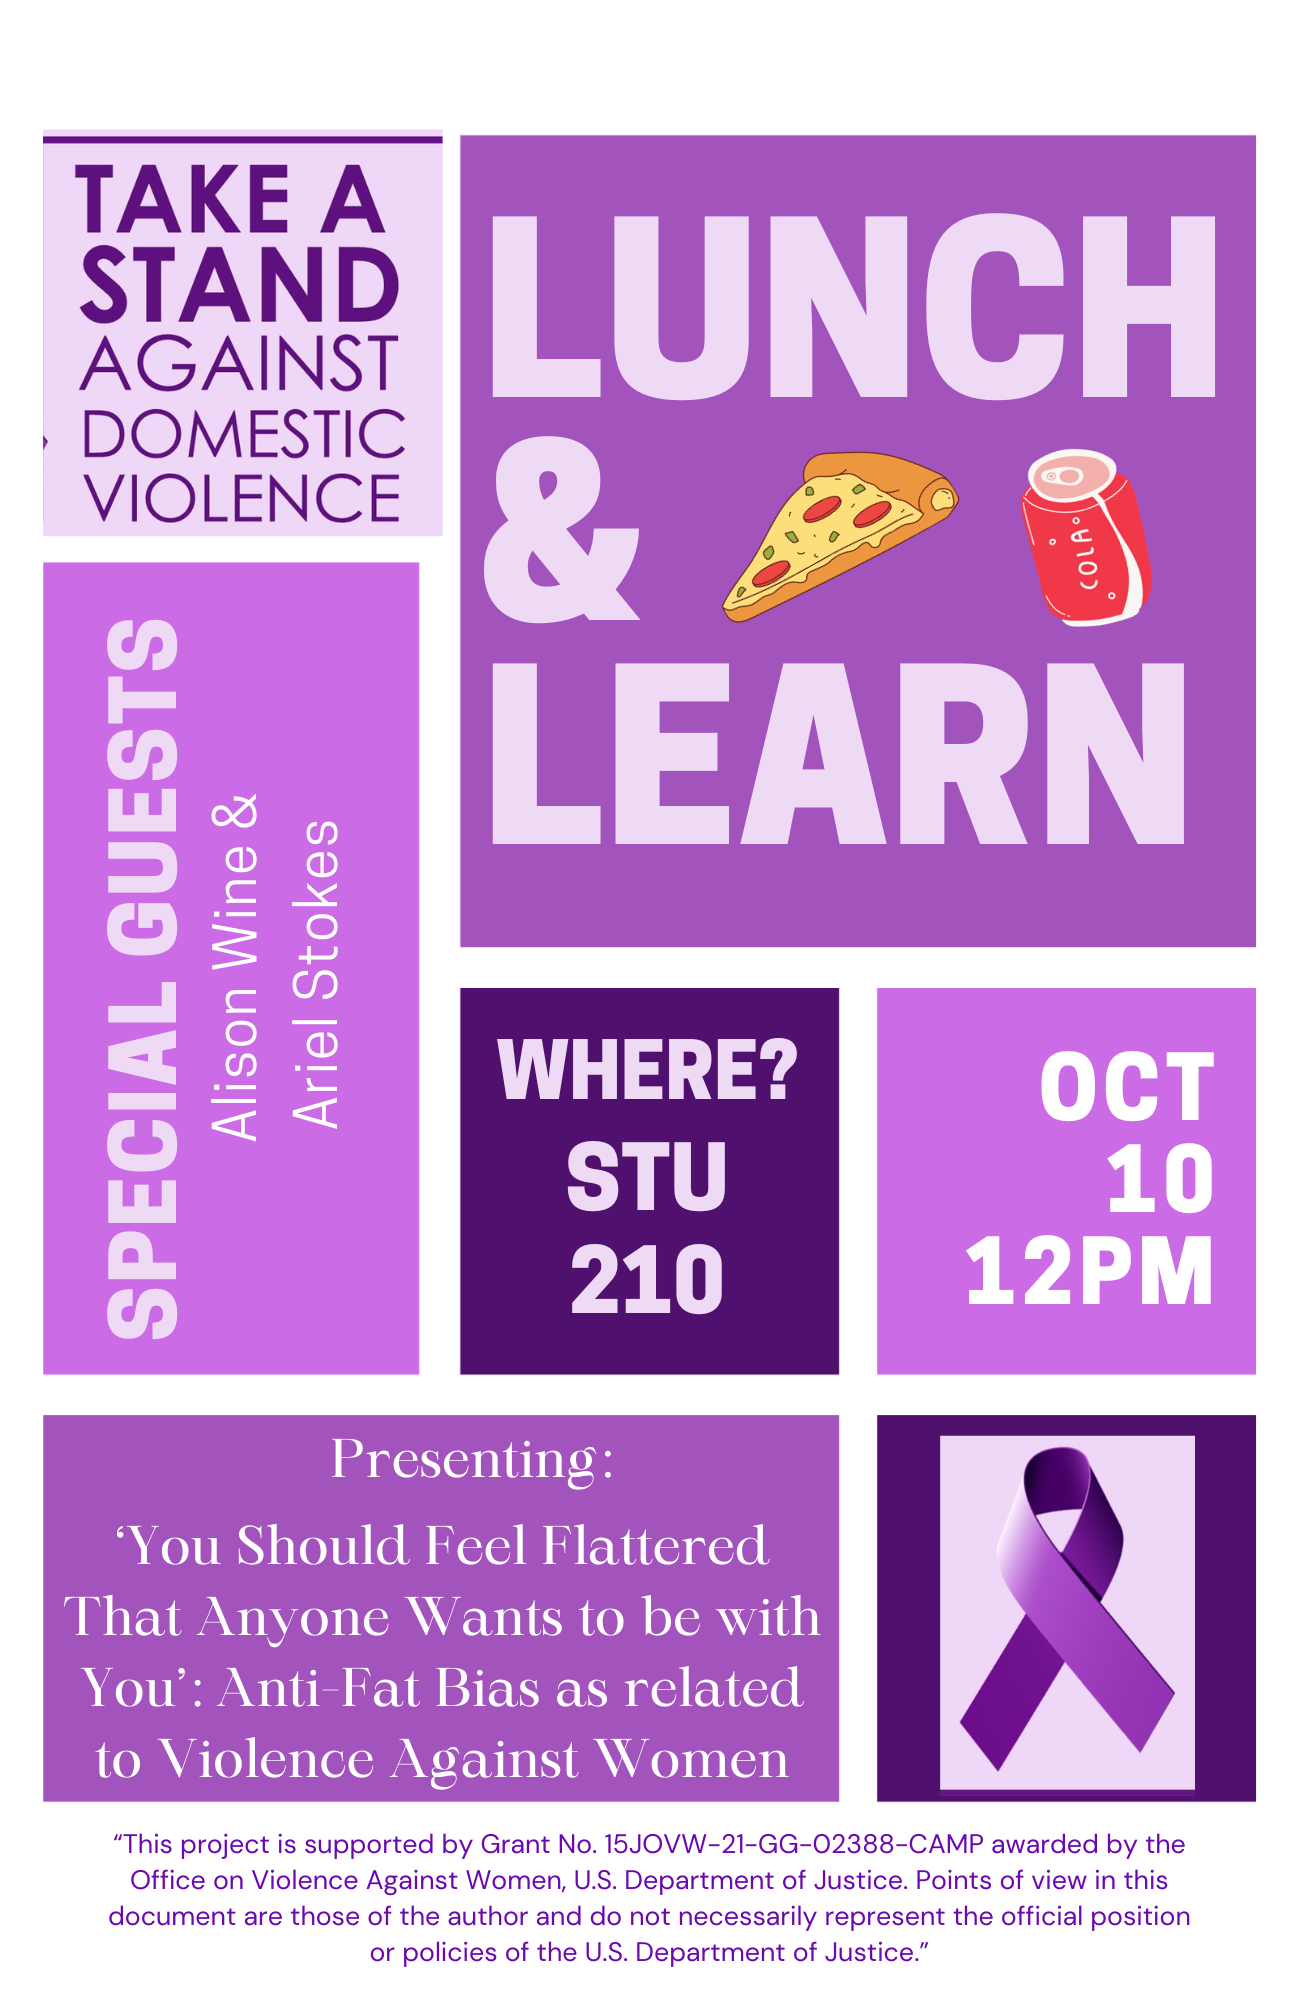 Lunch and Learn Oct